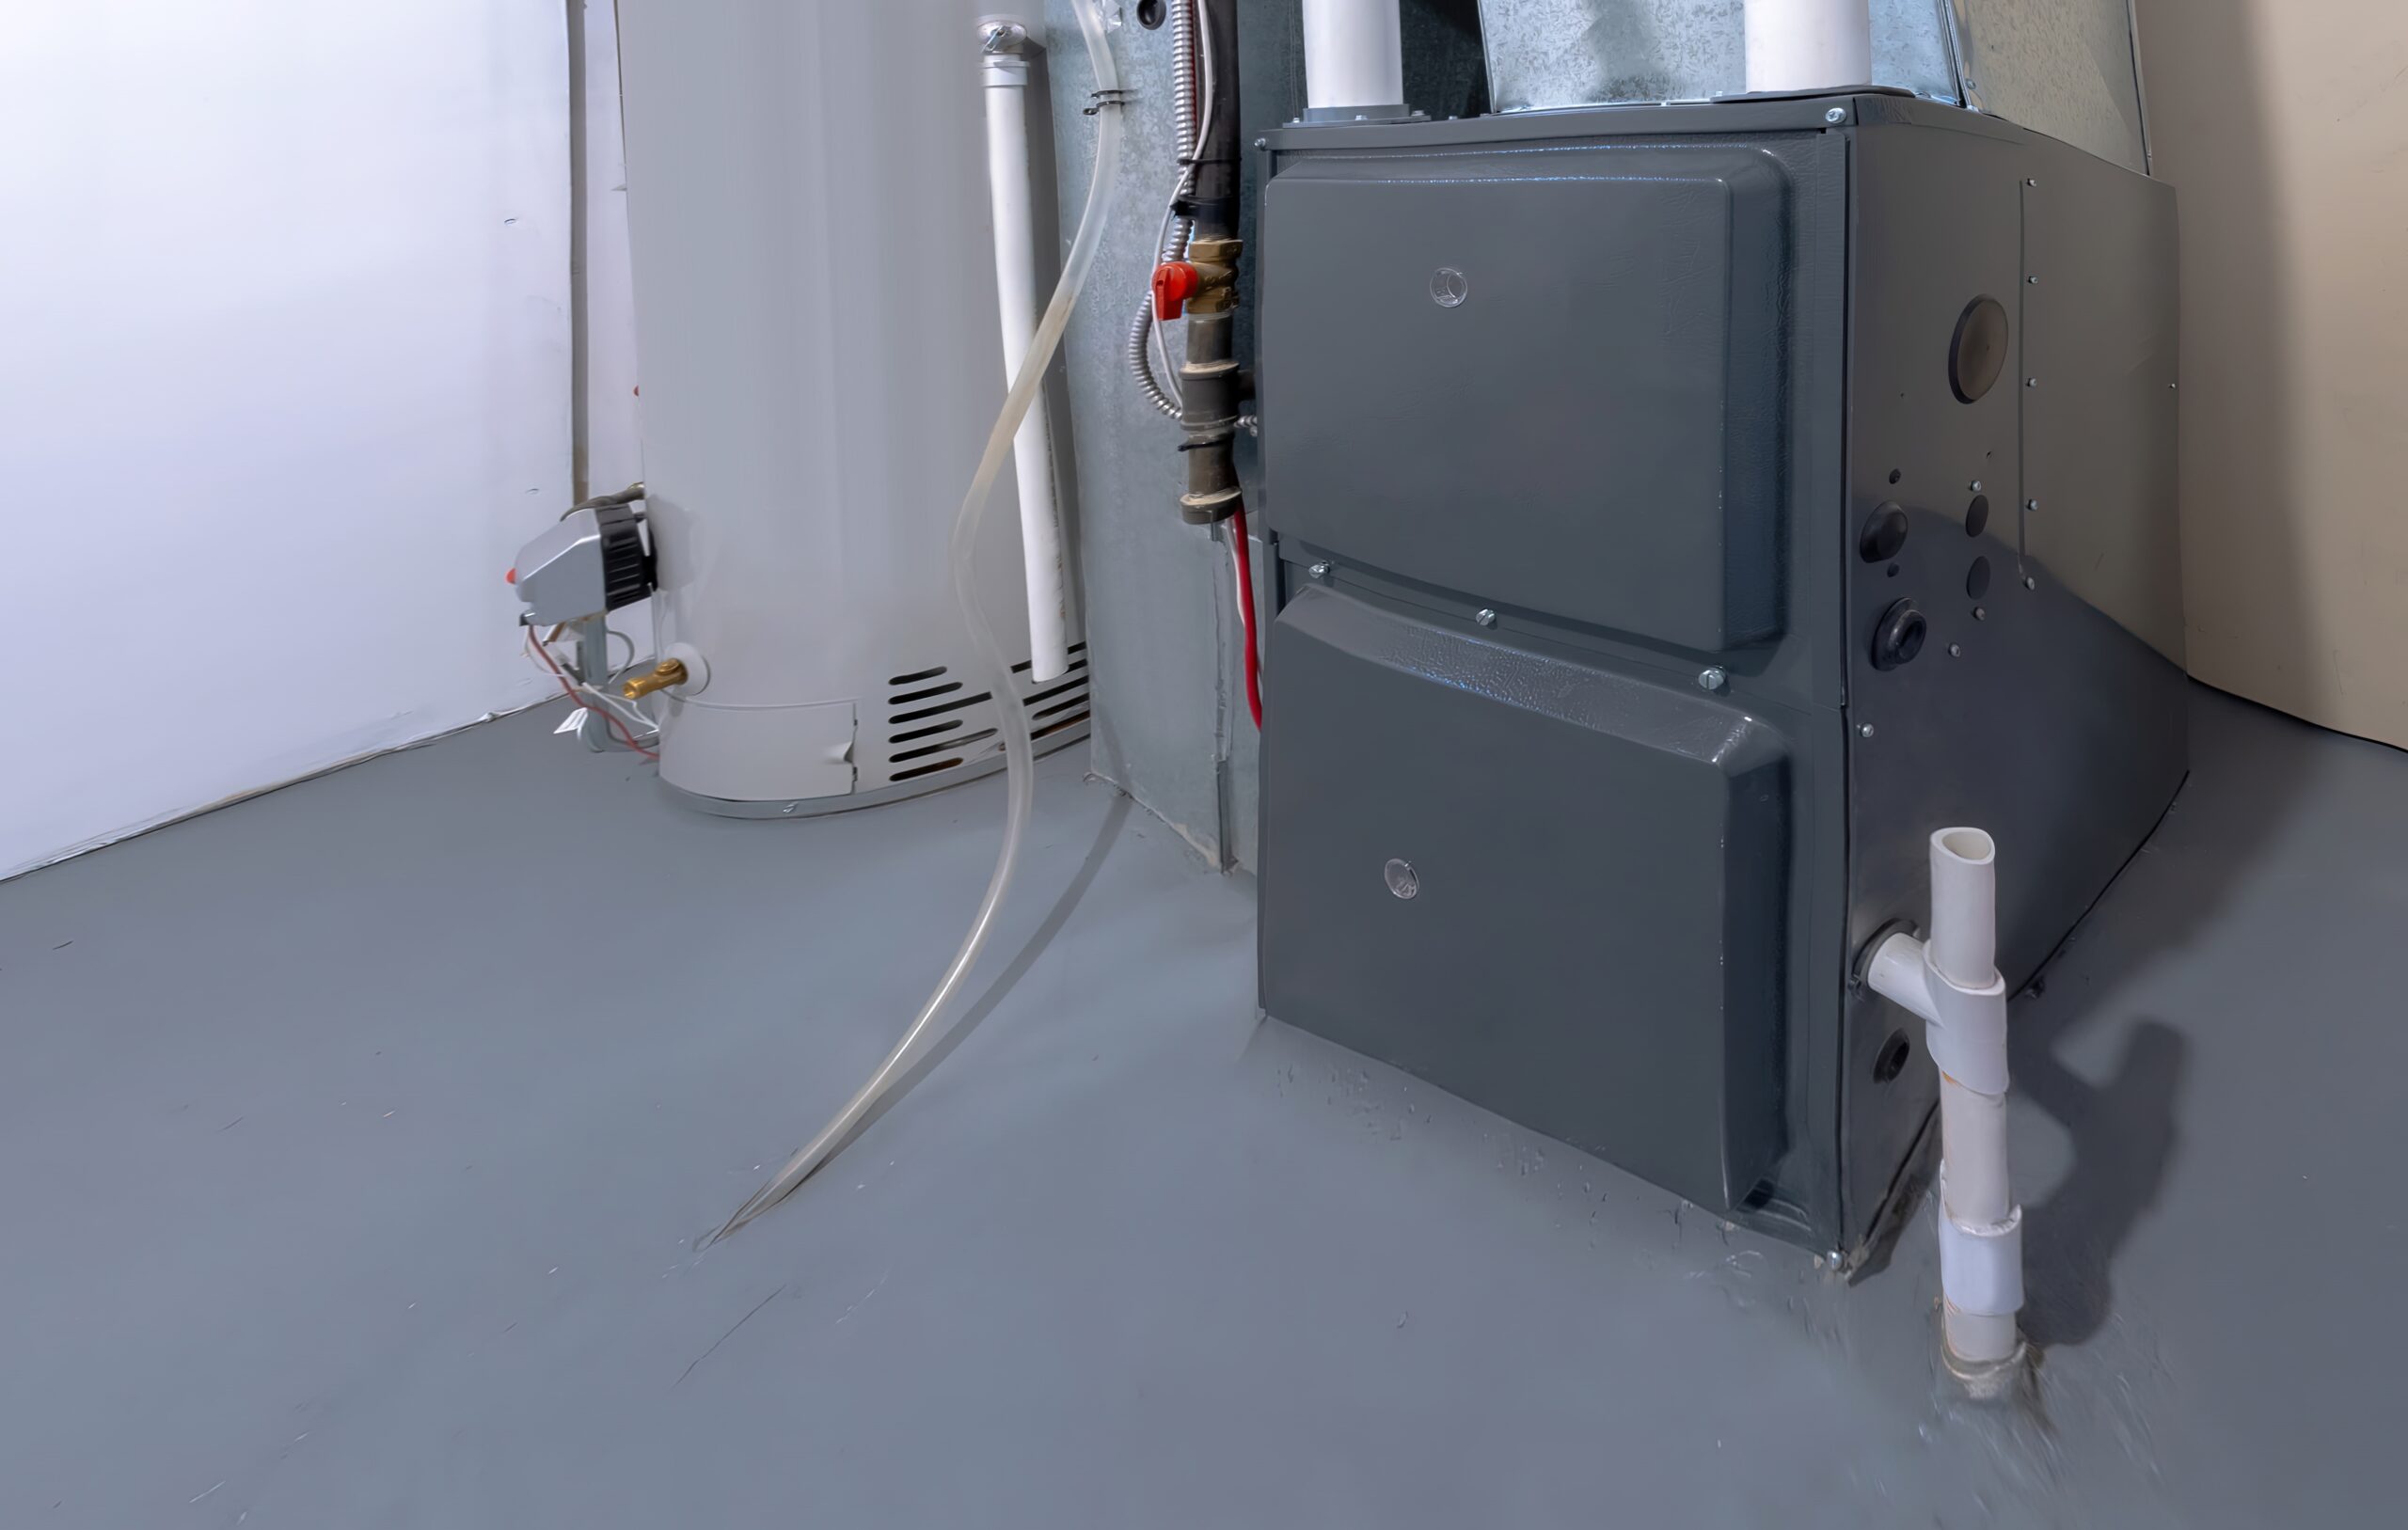 Furnace Installation - How To Make Your Home Efficient & Eco-Friendly